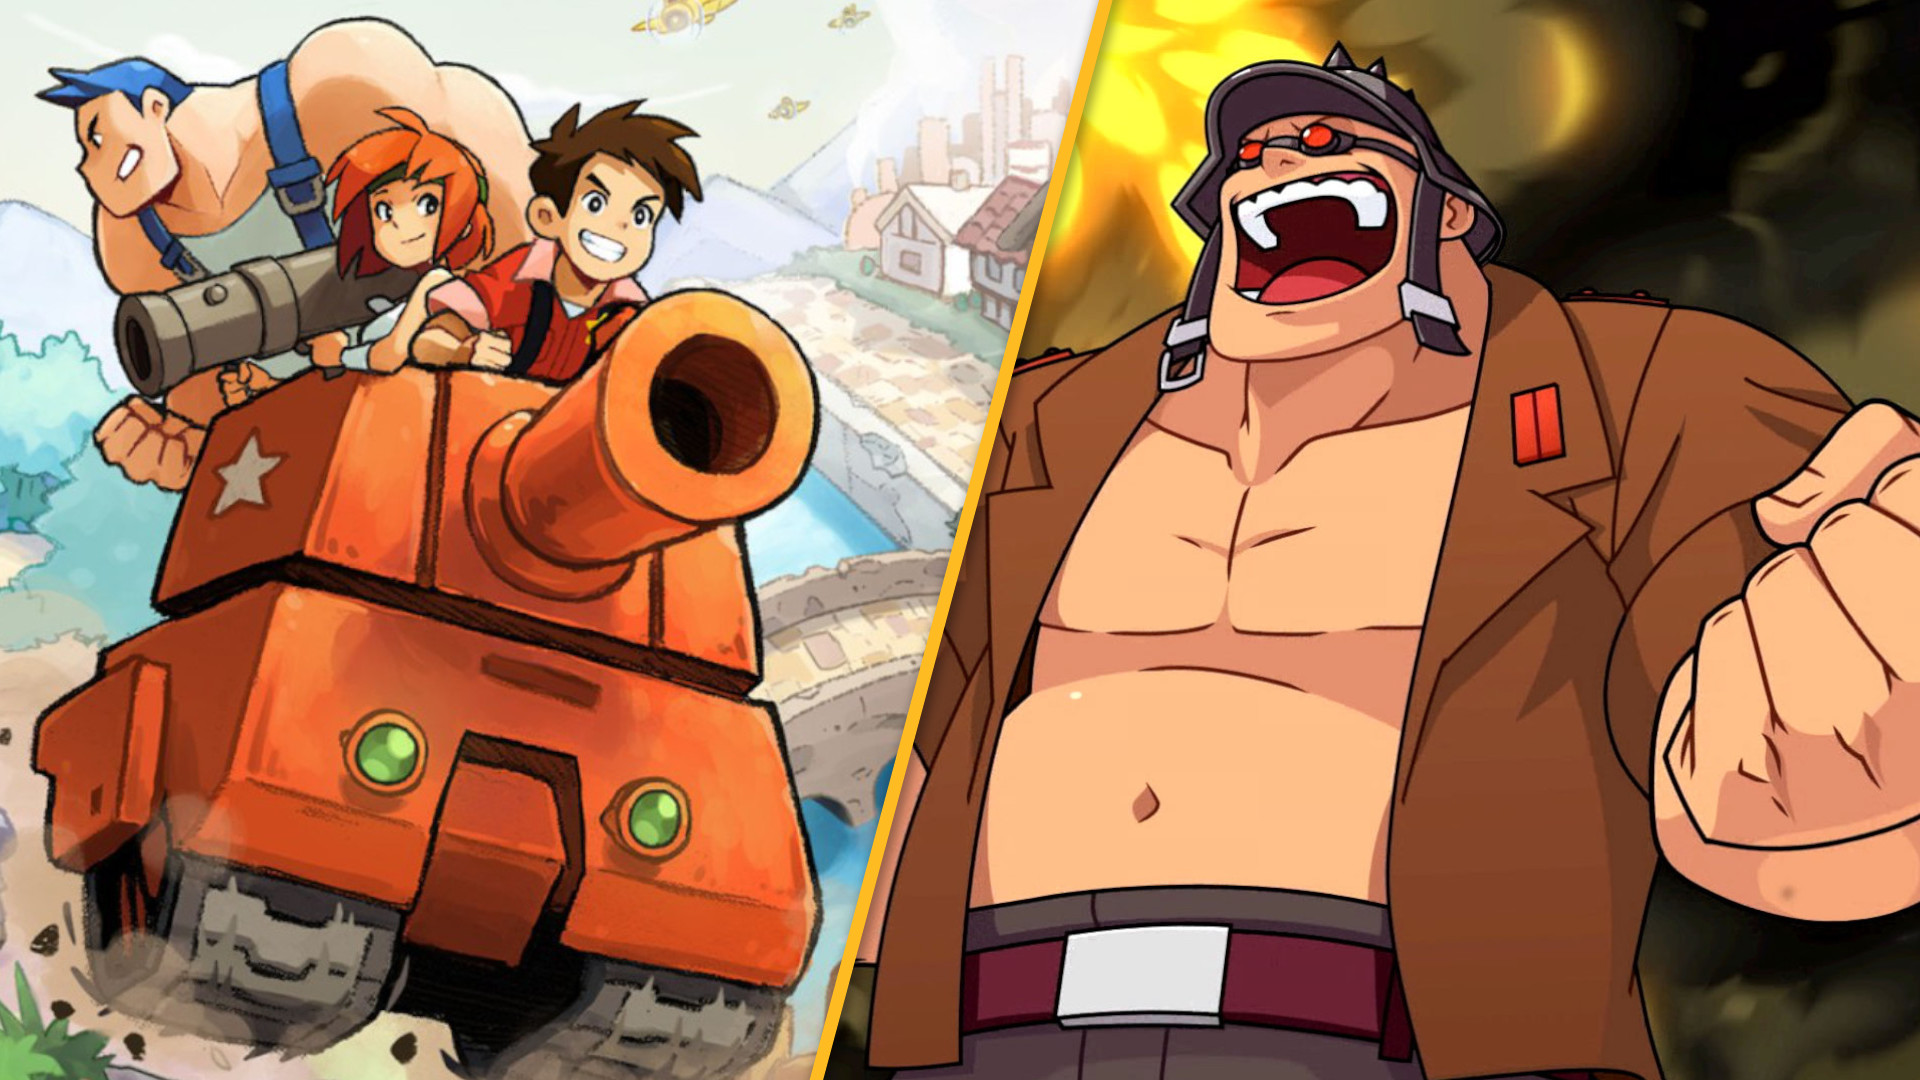 Advance Wars 1+2: Re-Boot Camp — Overview Trailer — Nintendo